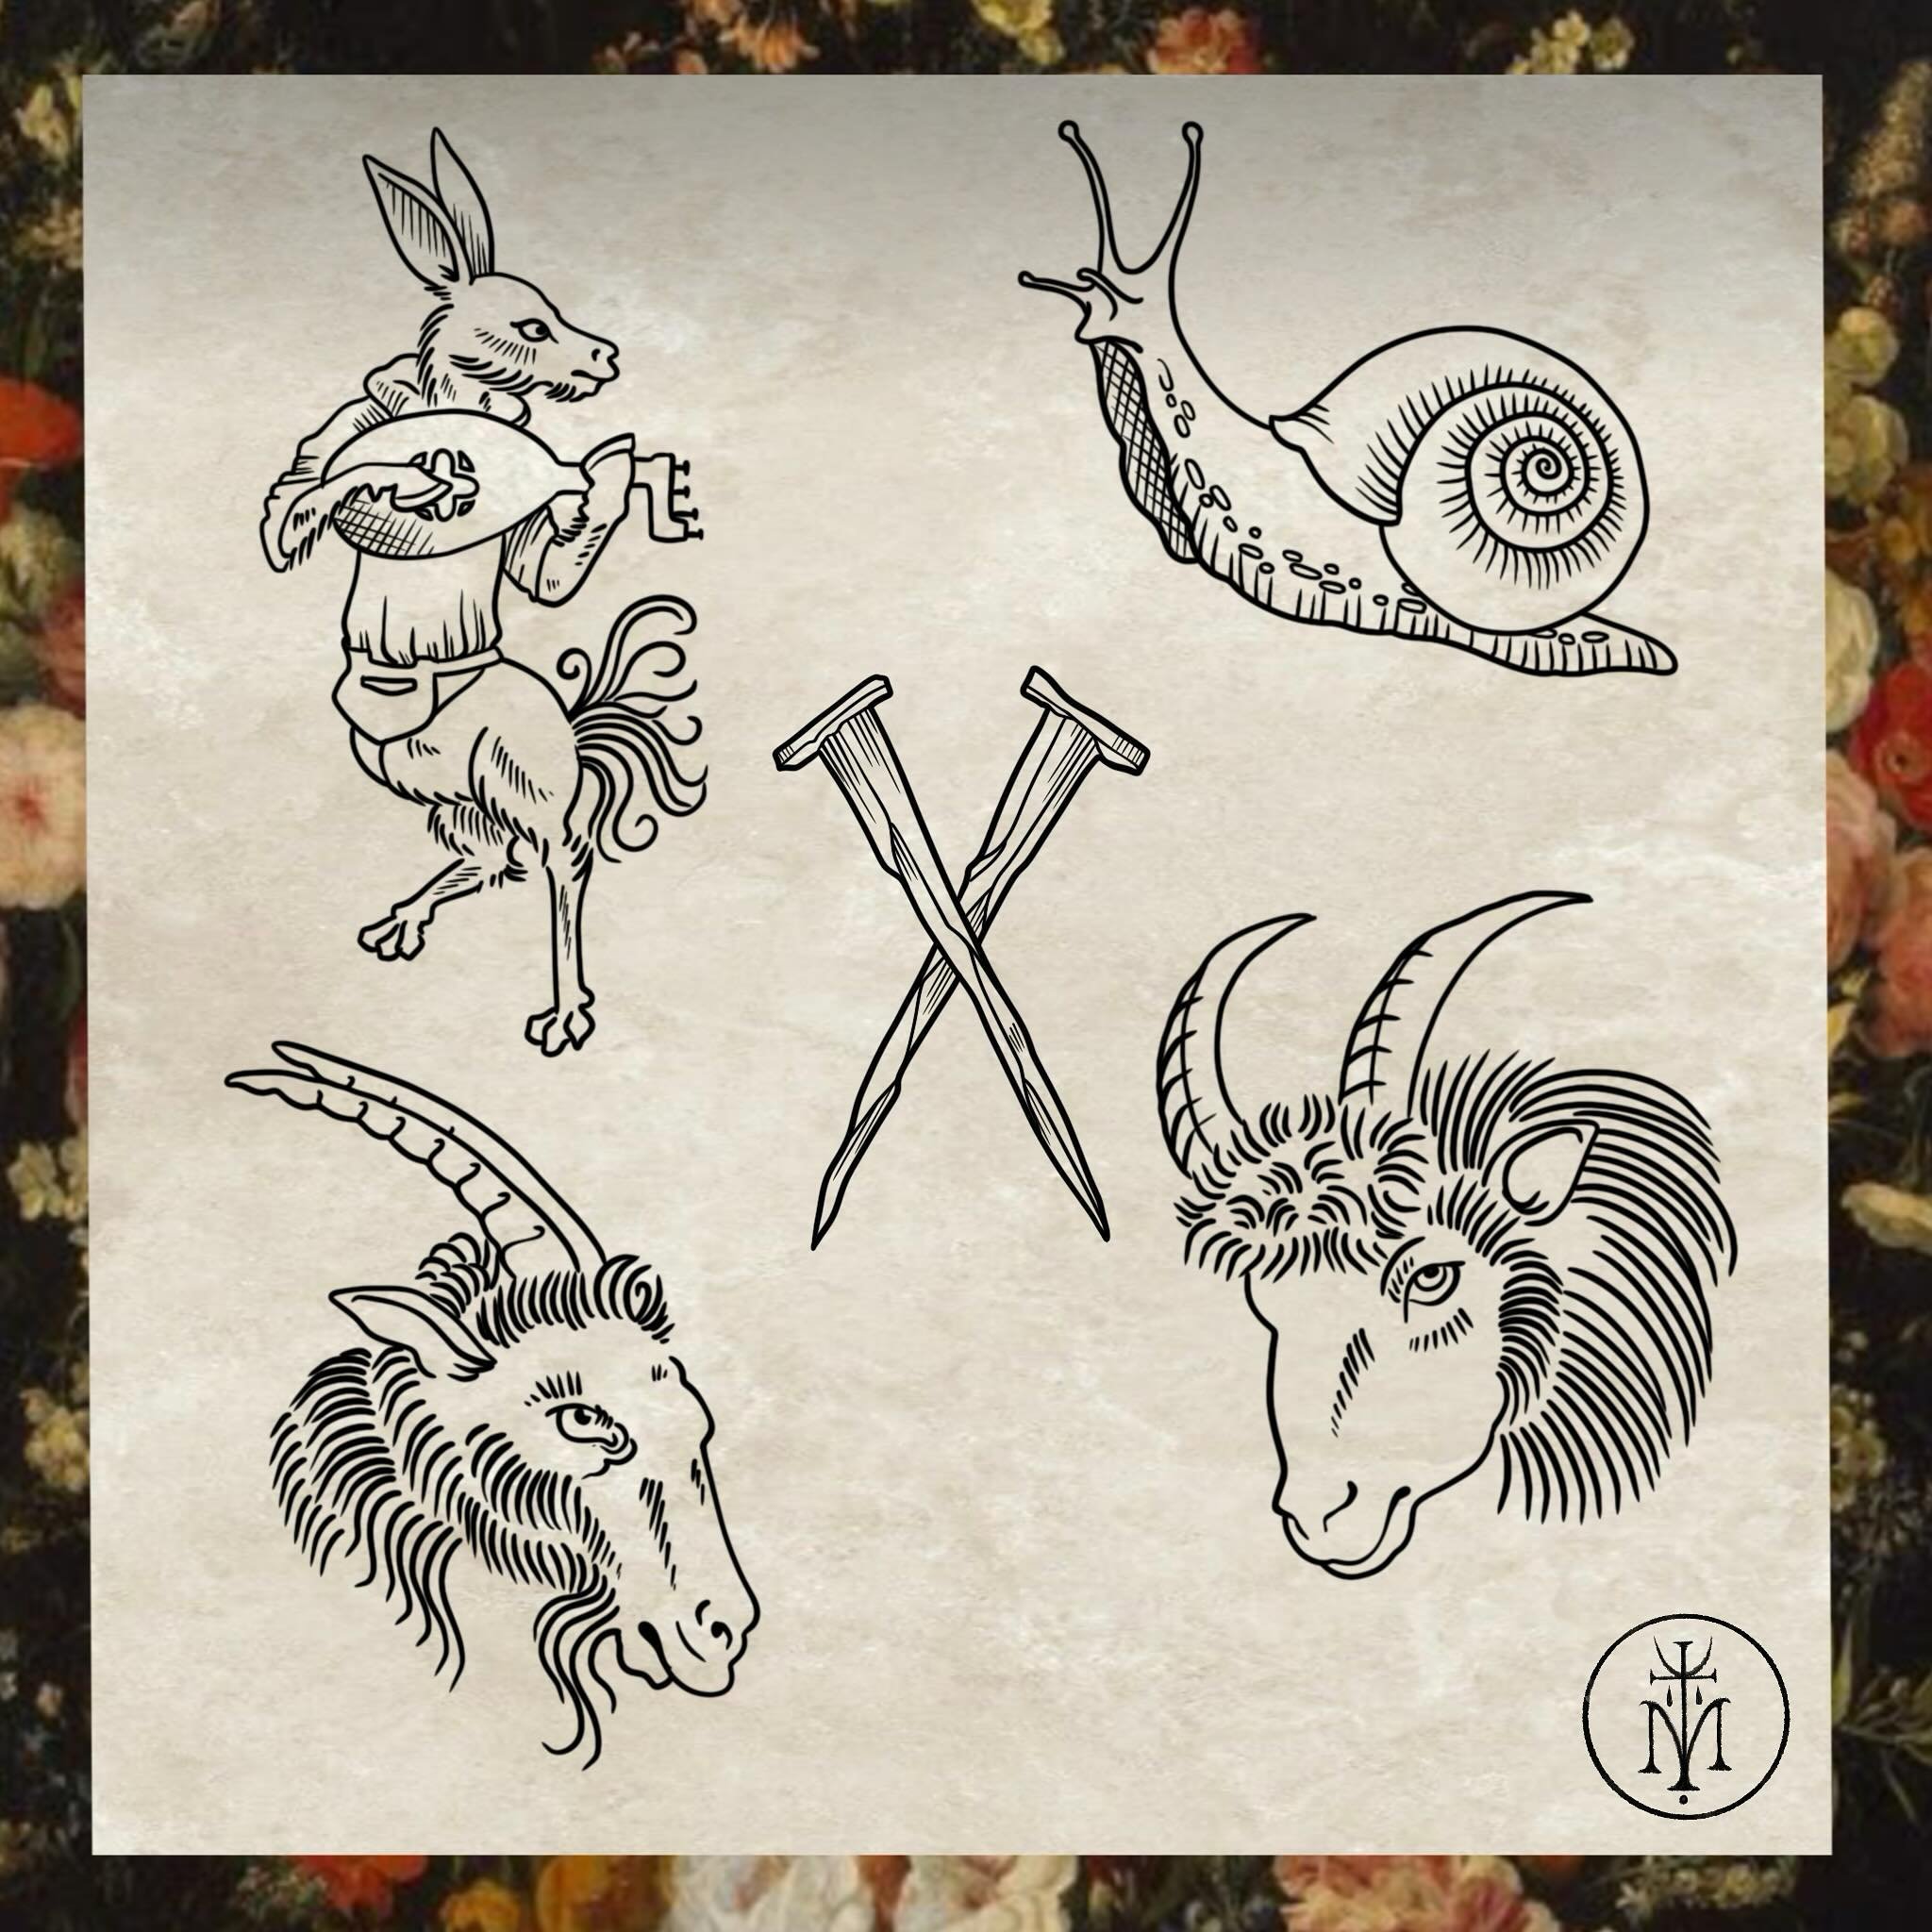 ⚜️available designs⚜️
Dm for inquiries 
.
.
.
.
.
.
.
.
.
.
.
.
.
.
#tattoo #flash #tattooflash #medievalart #pagan #witchy #witchesofinstagram